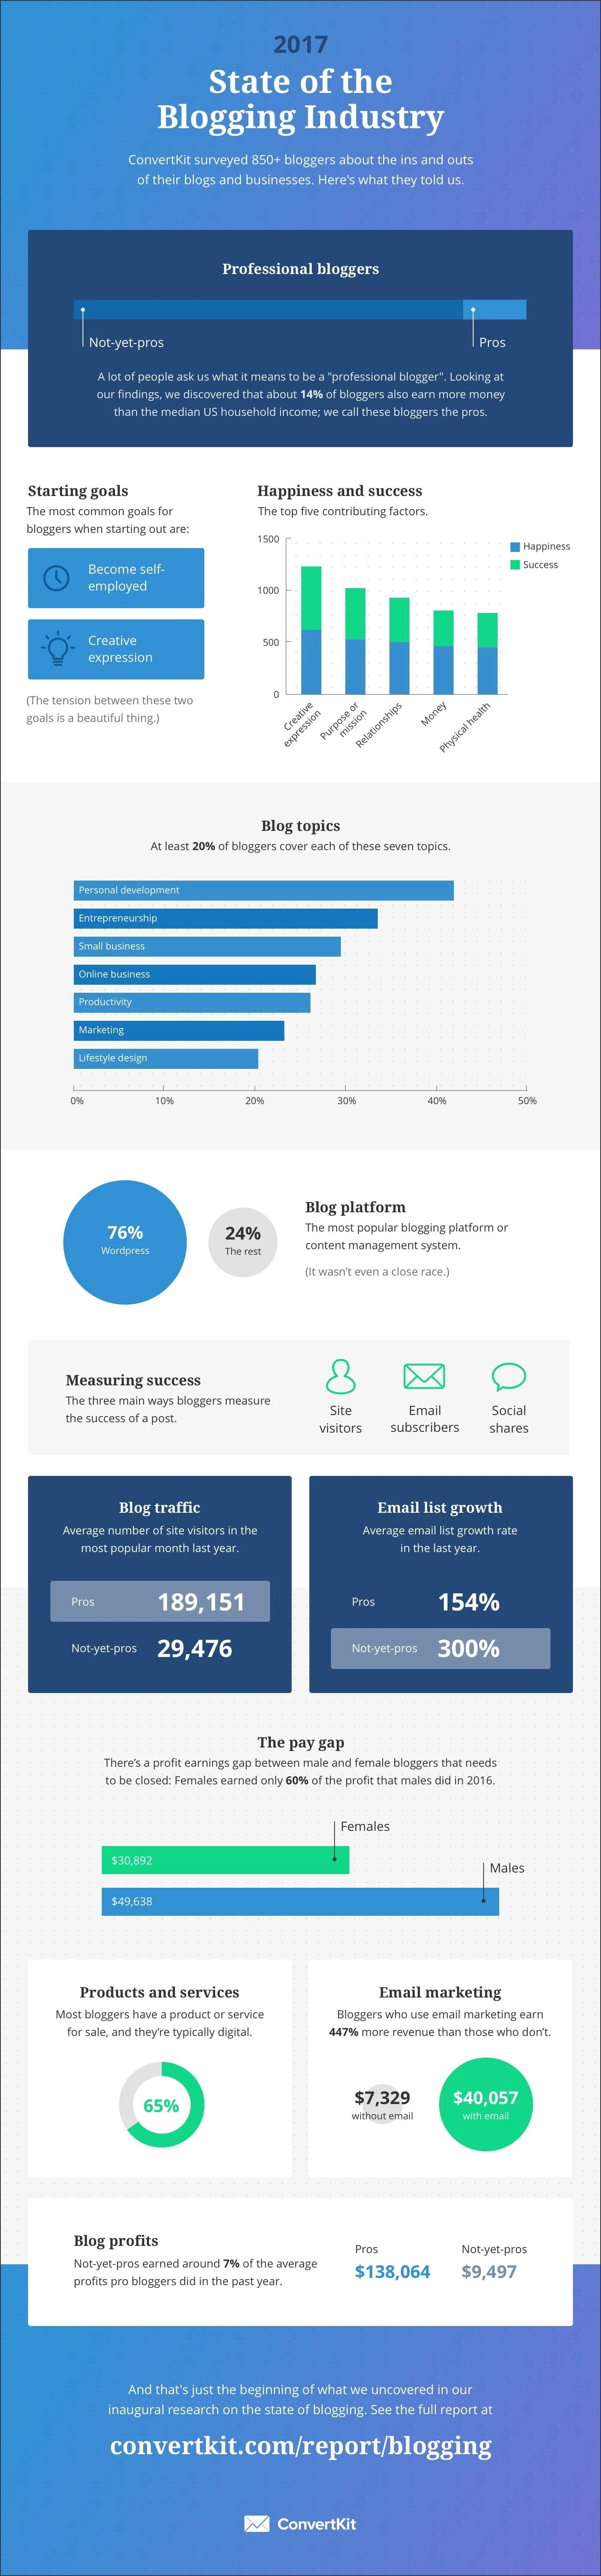 The State of the Blogging Industry 2017 - #infographic